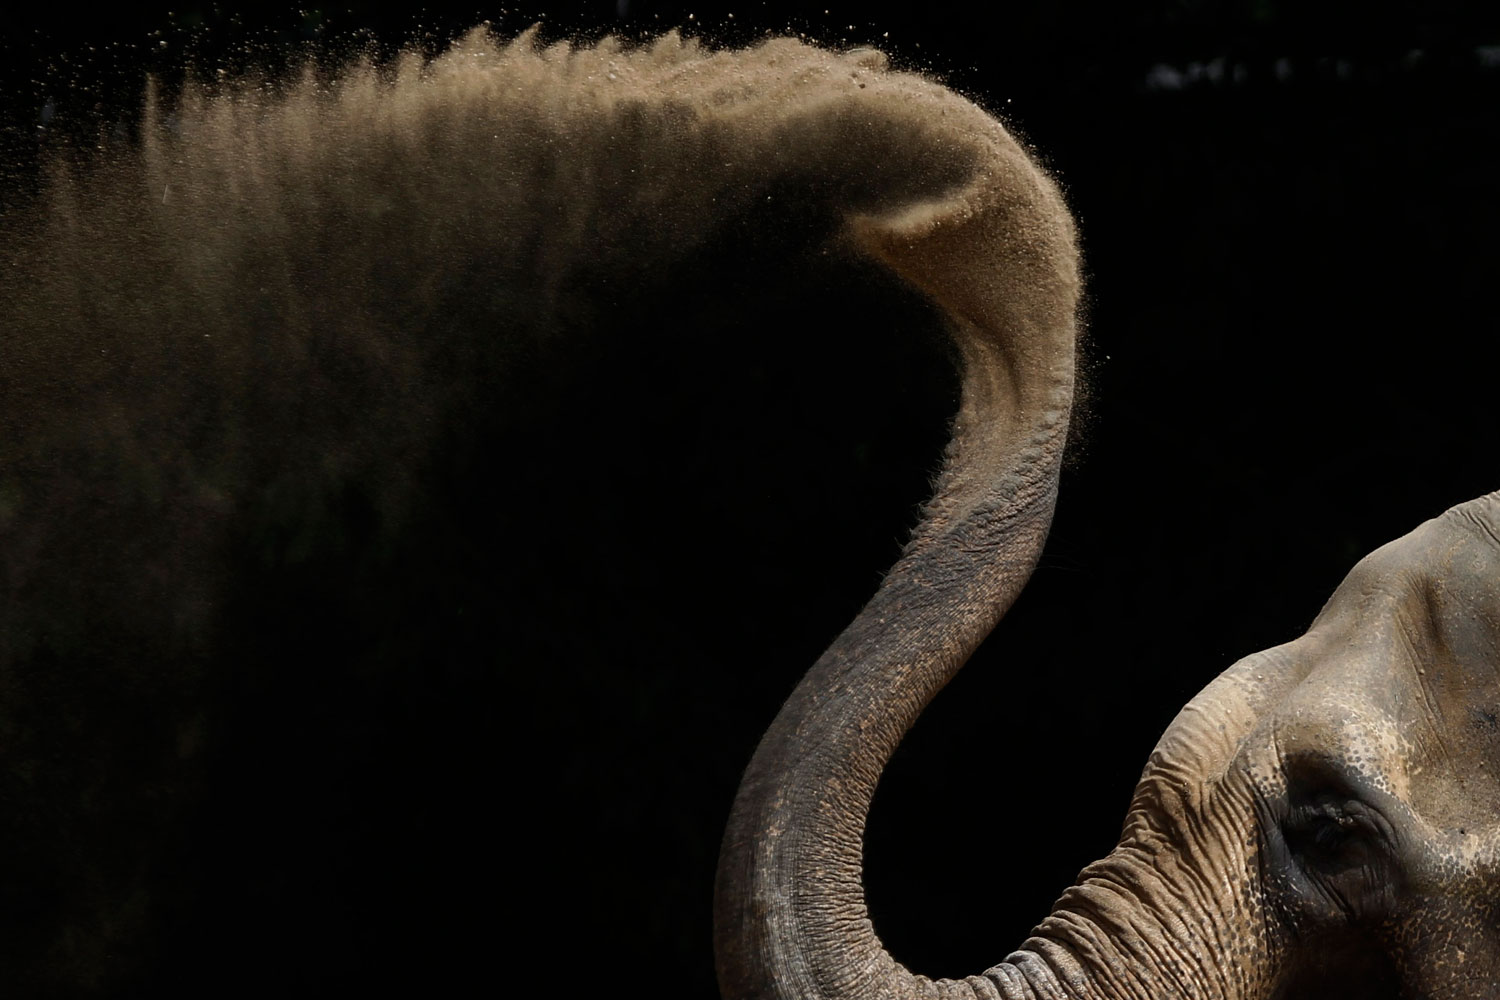 An Asian elephant dries off with sand in his enclosure at the zoo in Karlsruhe, Germany.